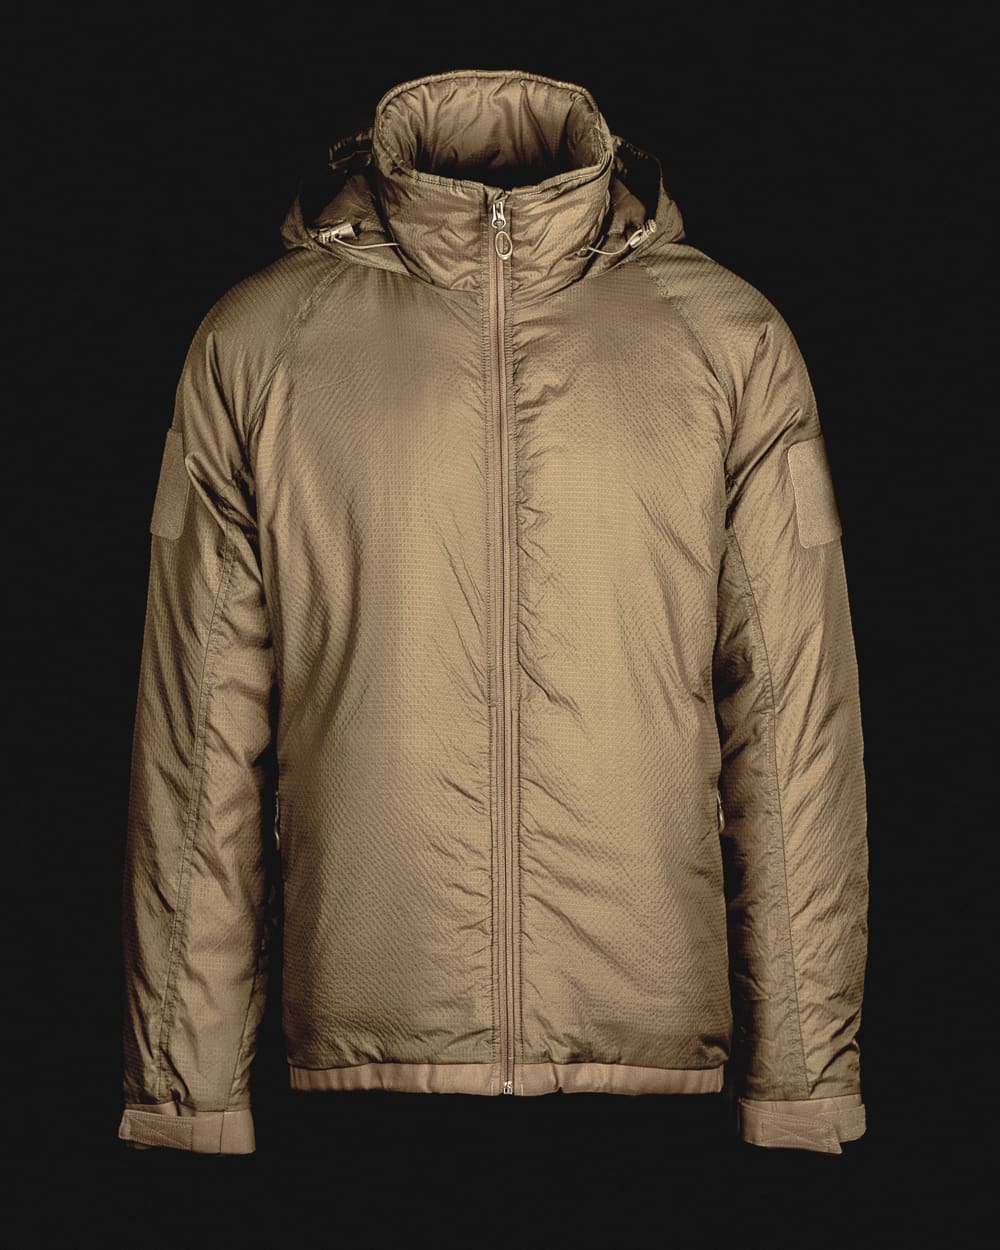 Beyond Clothing - A7 Cold Jacket Durable - Soldier Systems Daily